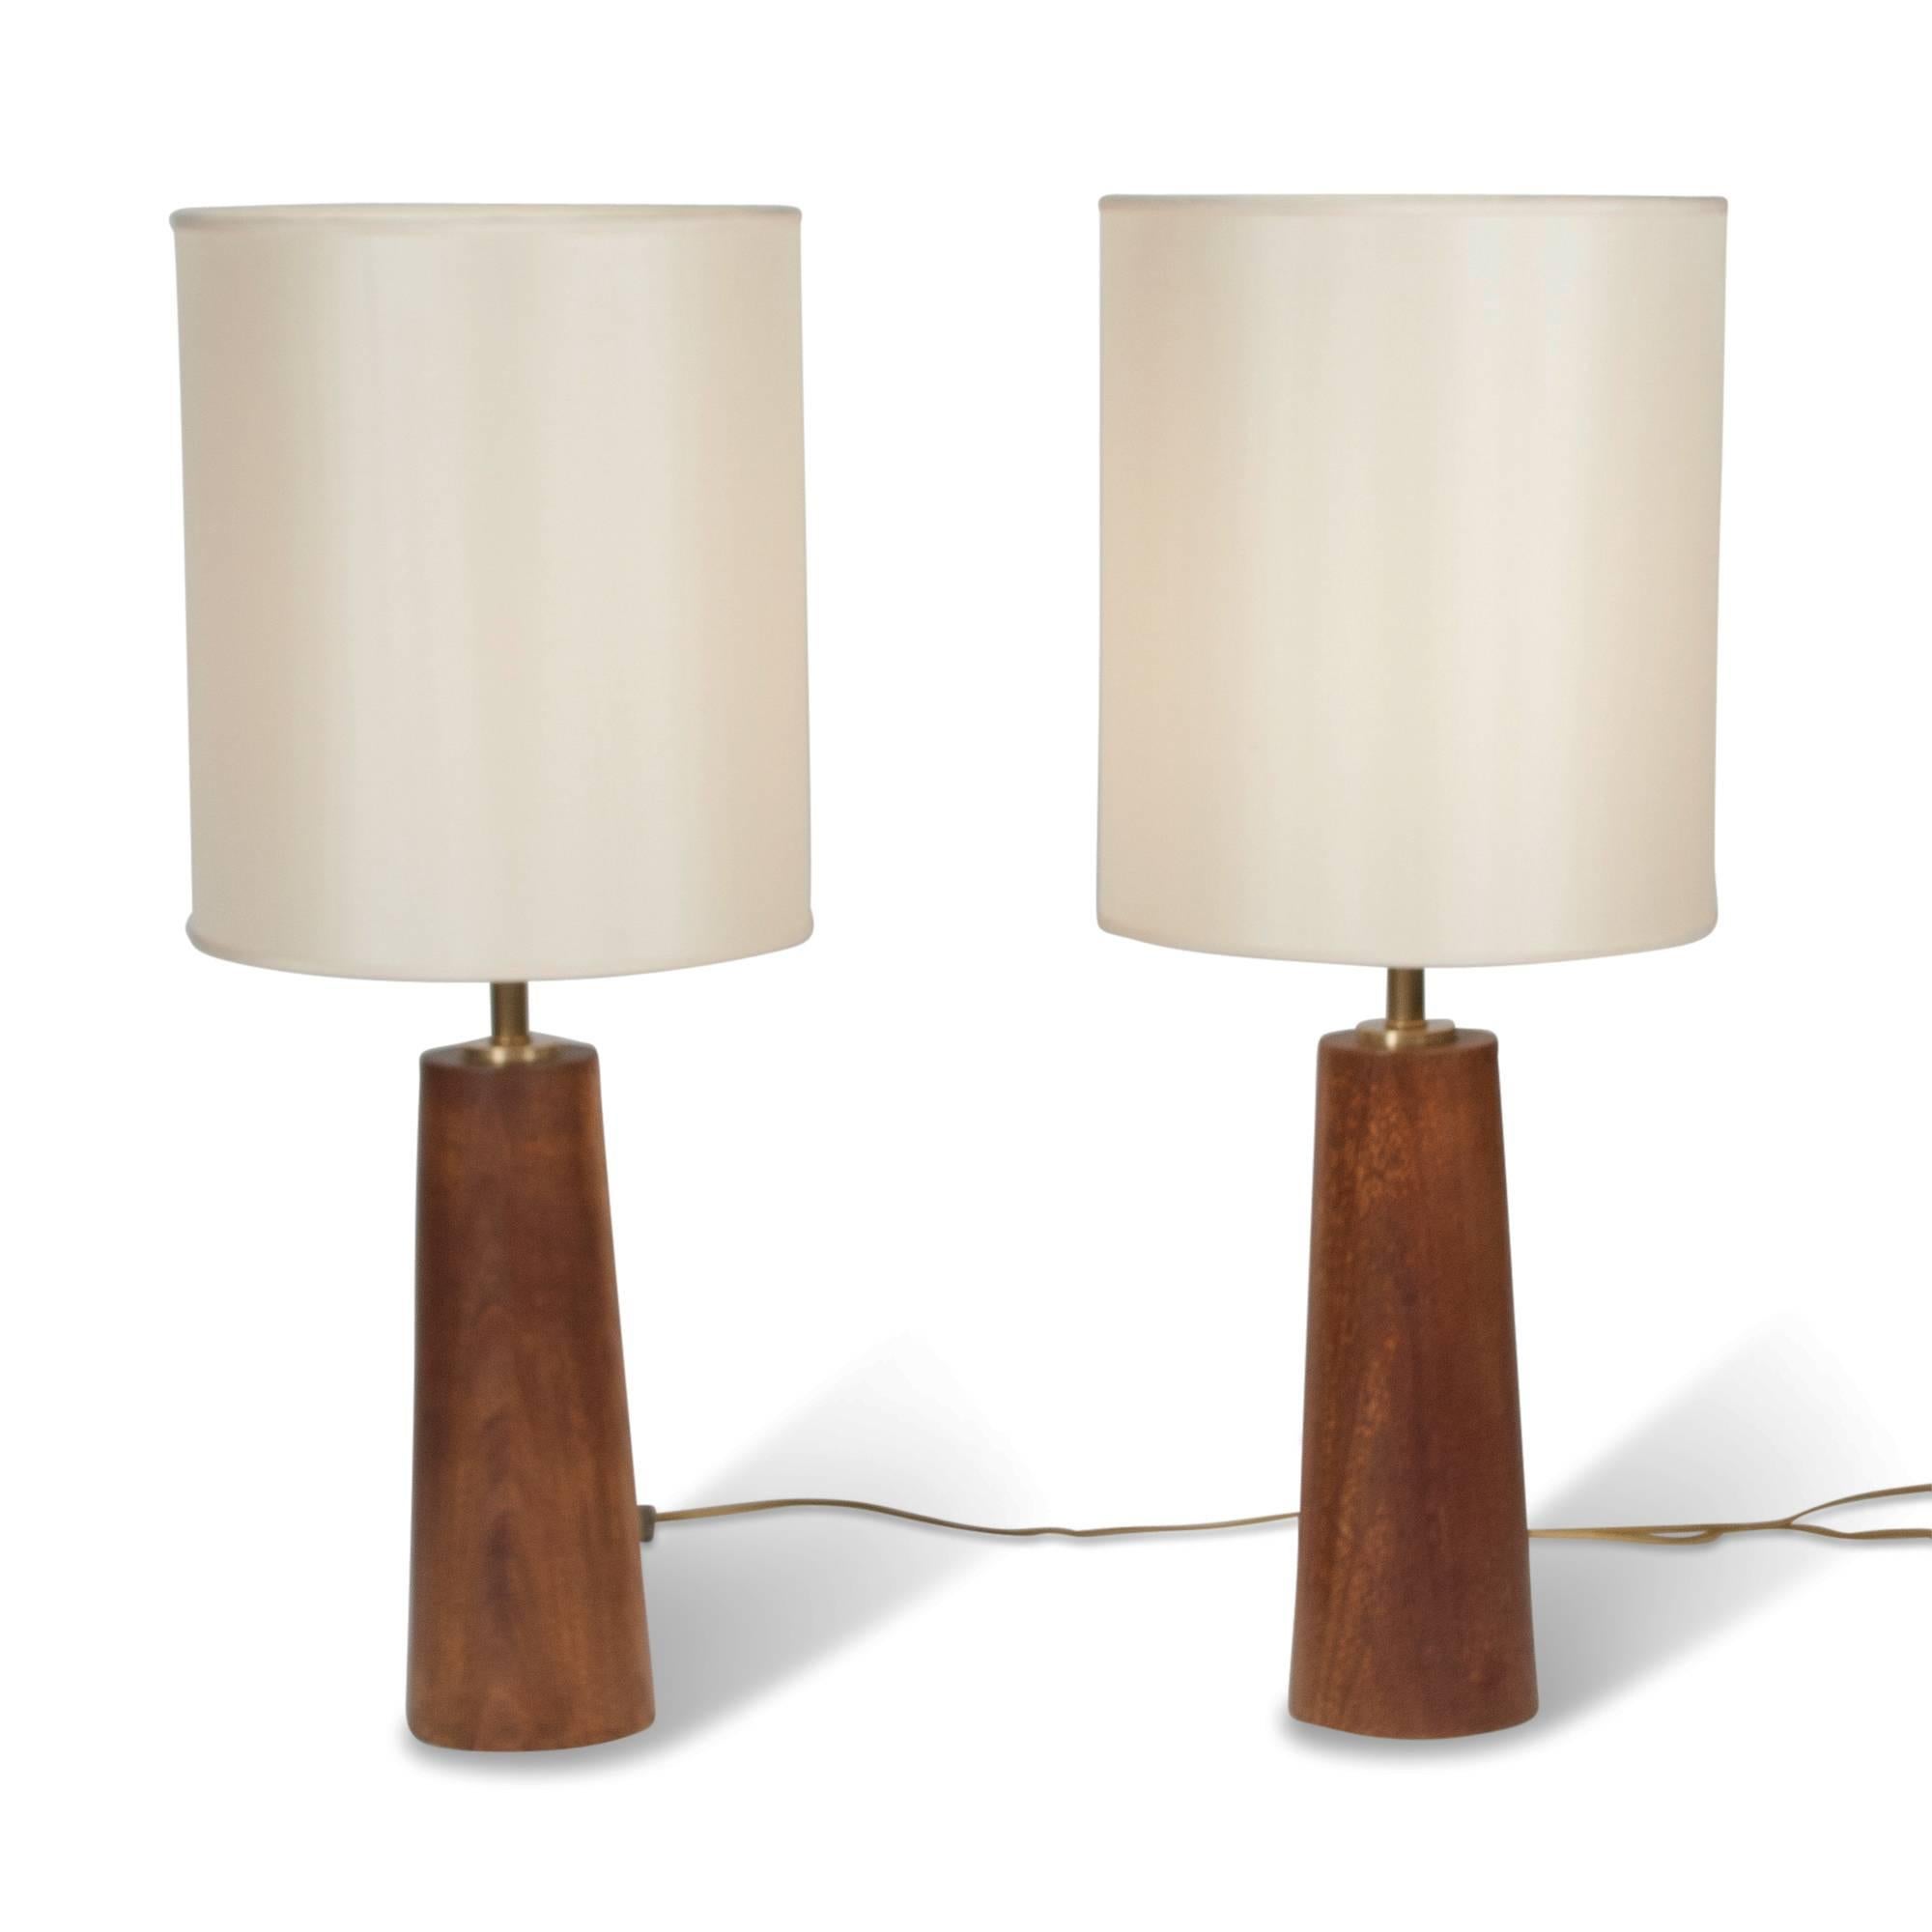 Pair of turned mahogany column table lamps, in custom shades, Denmark, 1950s. Measures: Overall height 30 in, diameter of base 5 in. Shade measure top diameter 12 in, bottom diameter 12 in, height 14 in.
 